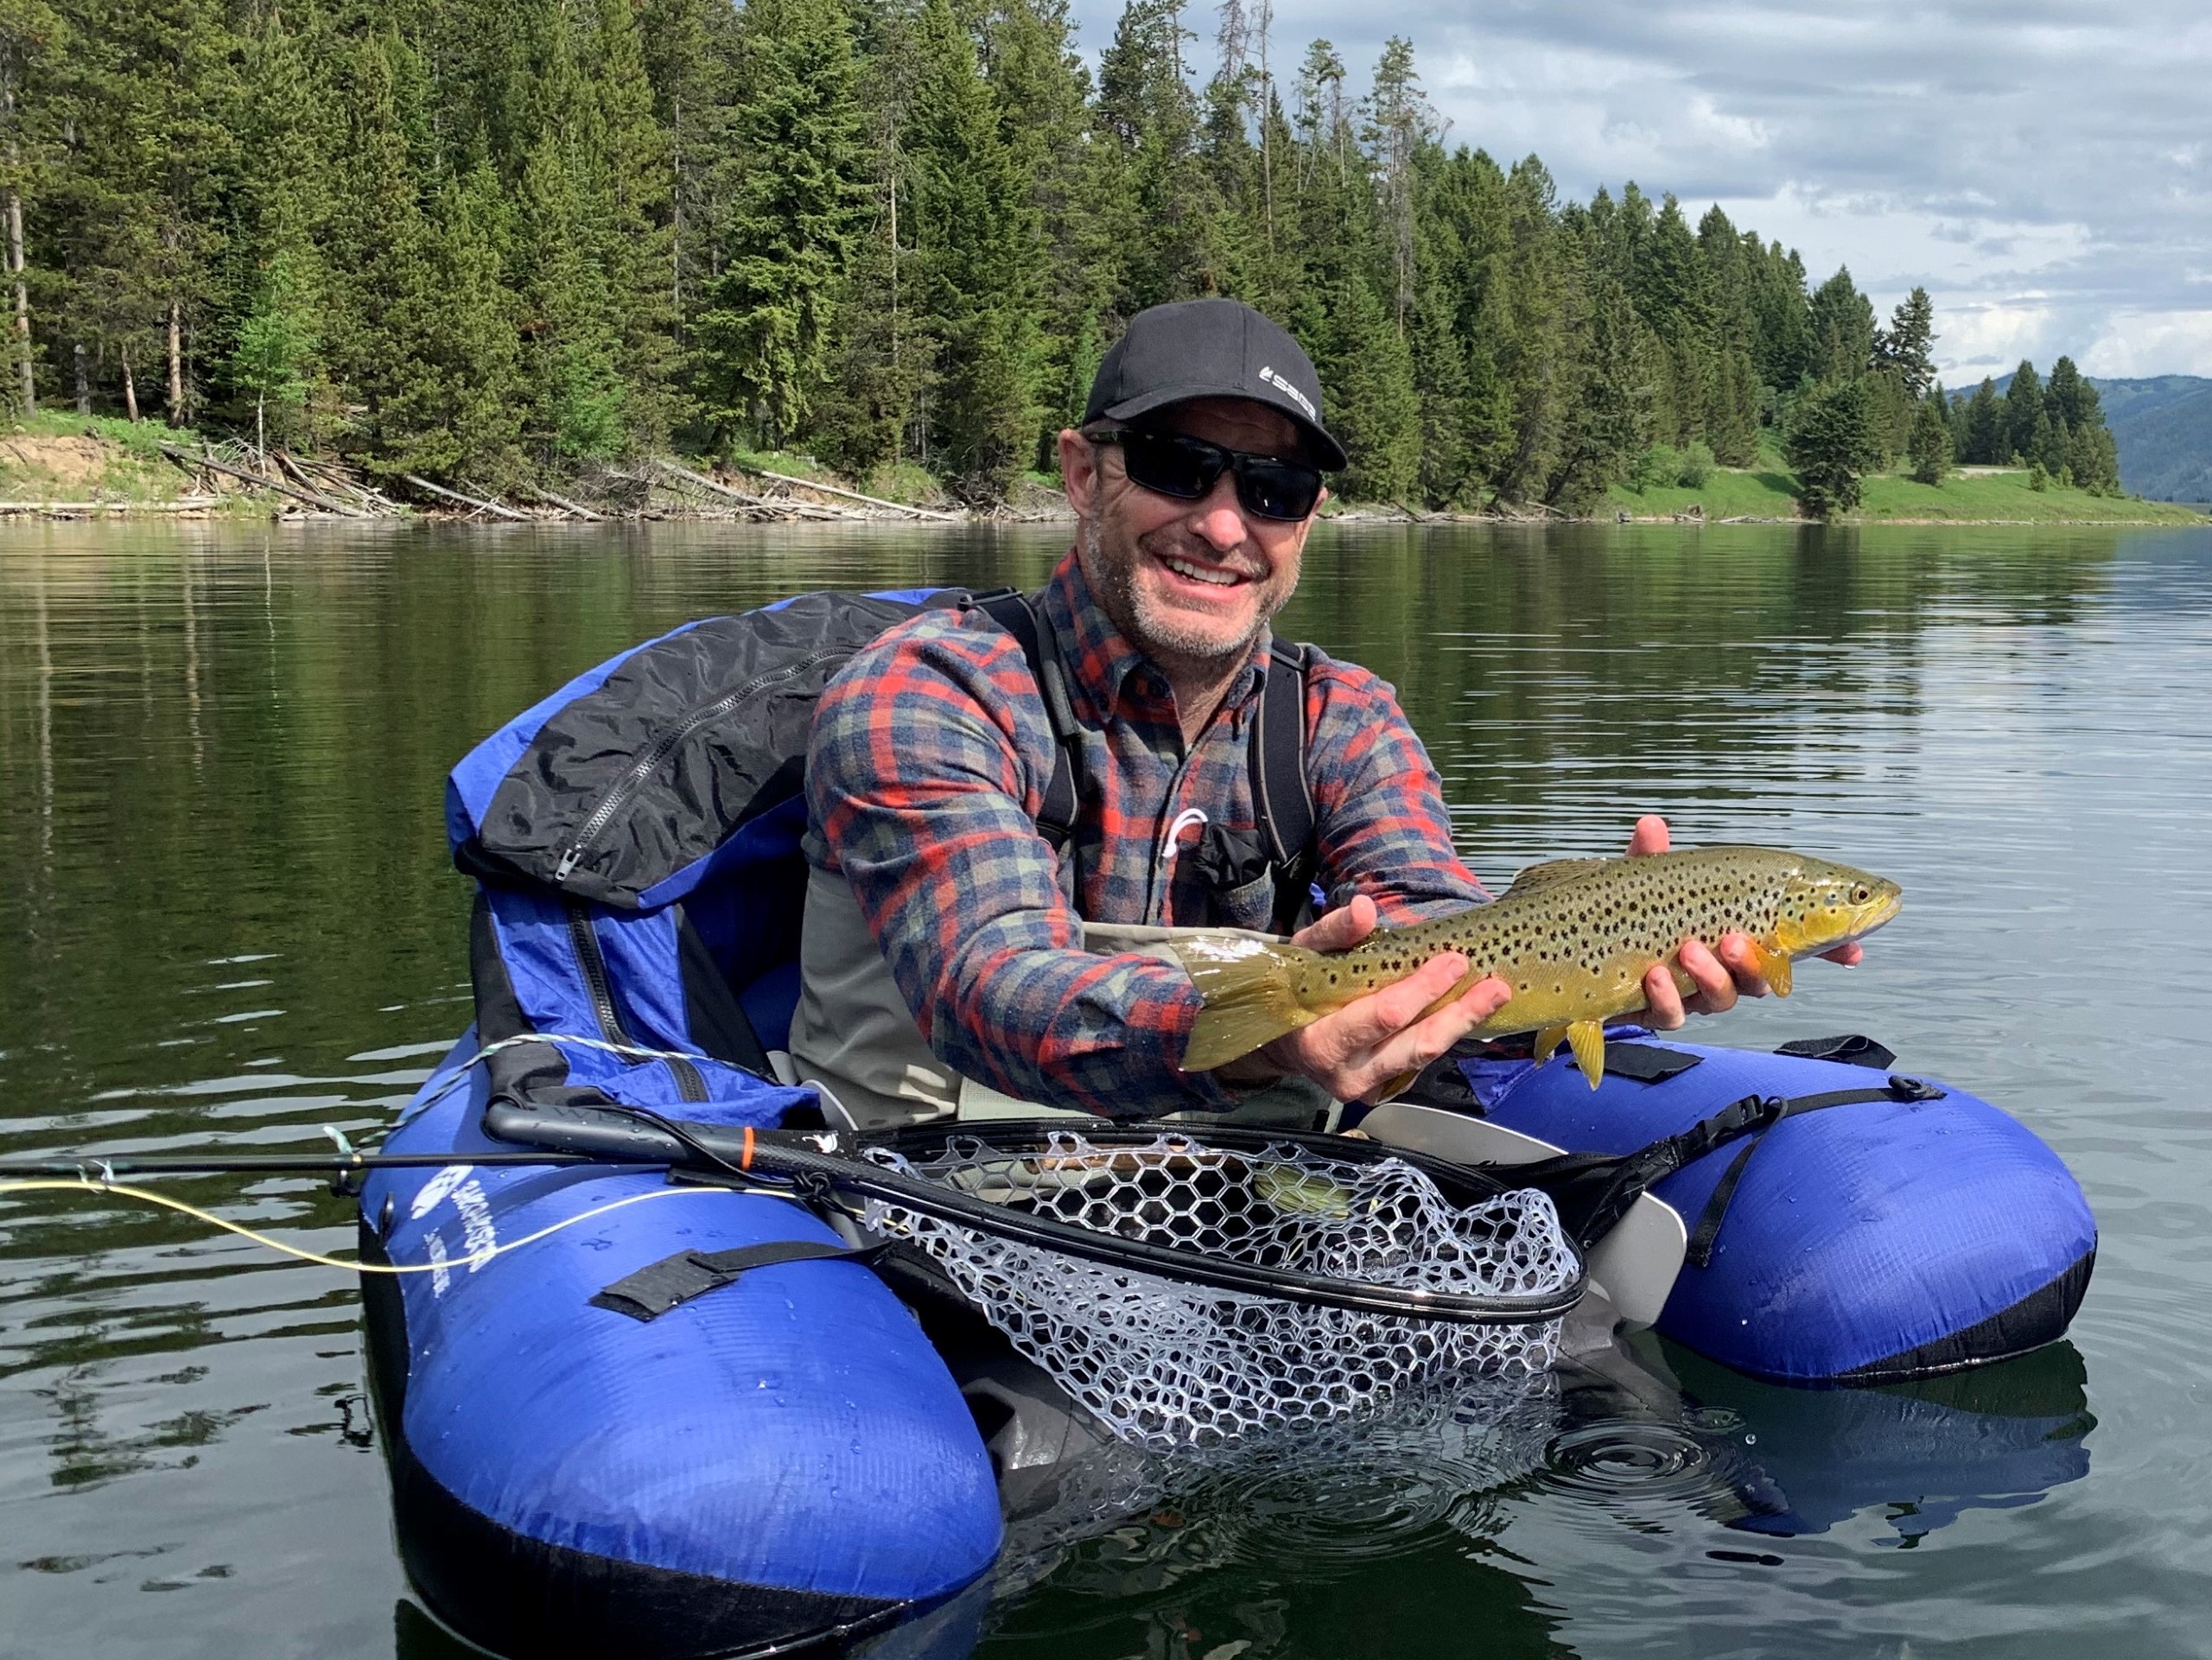 Jeff flyfishes for brown trout in the Montana backcountry.